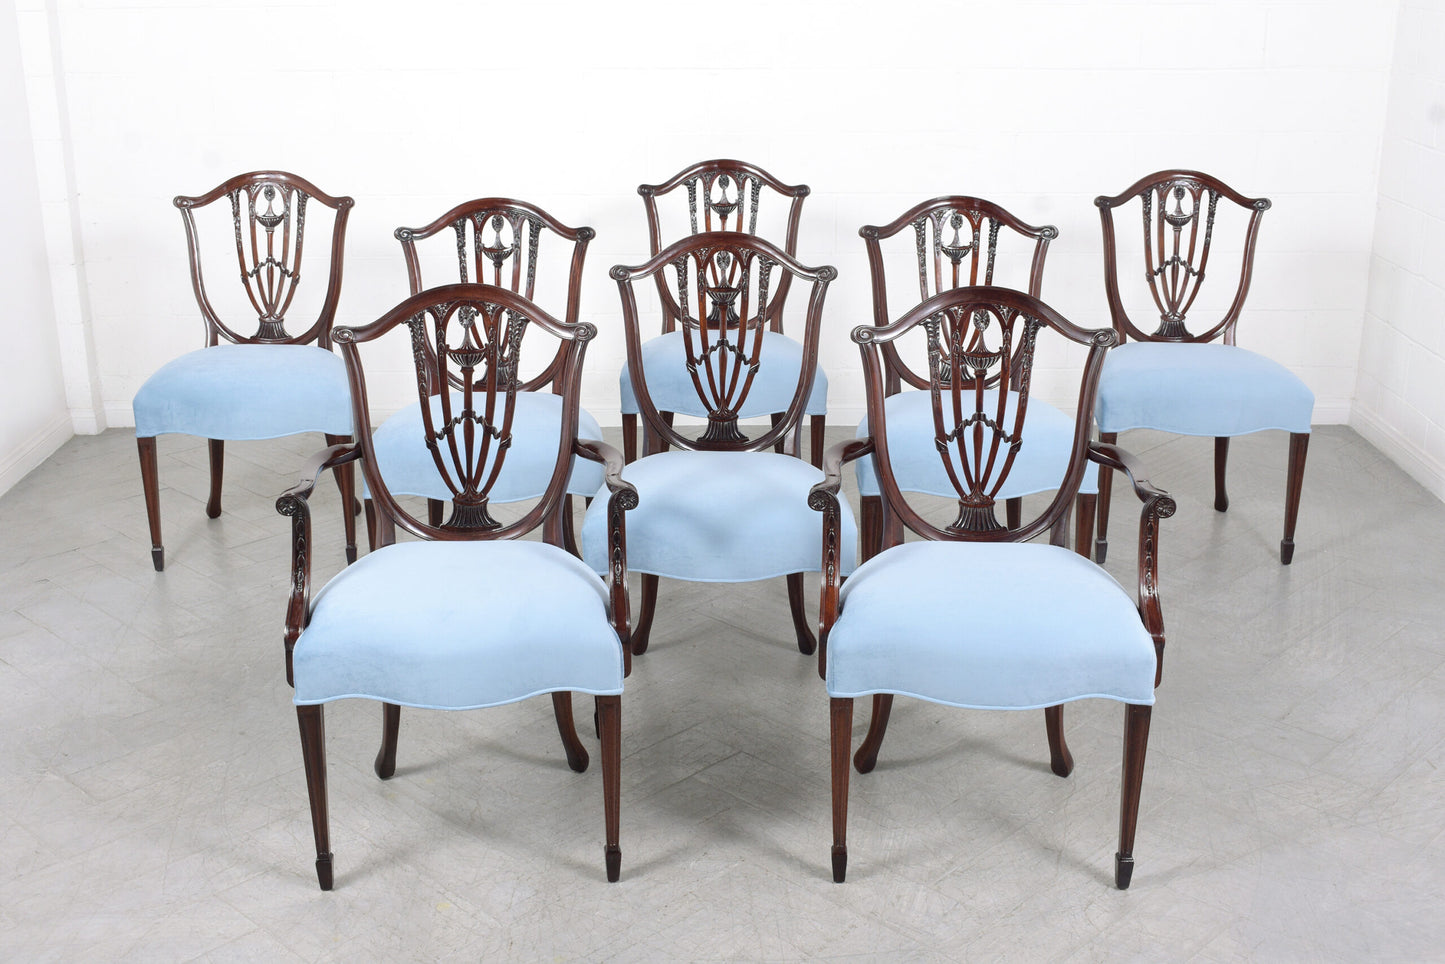 Set of Eight Mahogany Dining Room Chairs